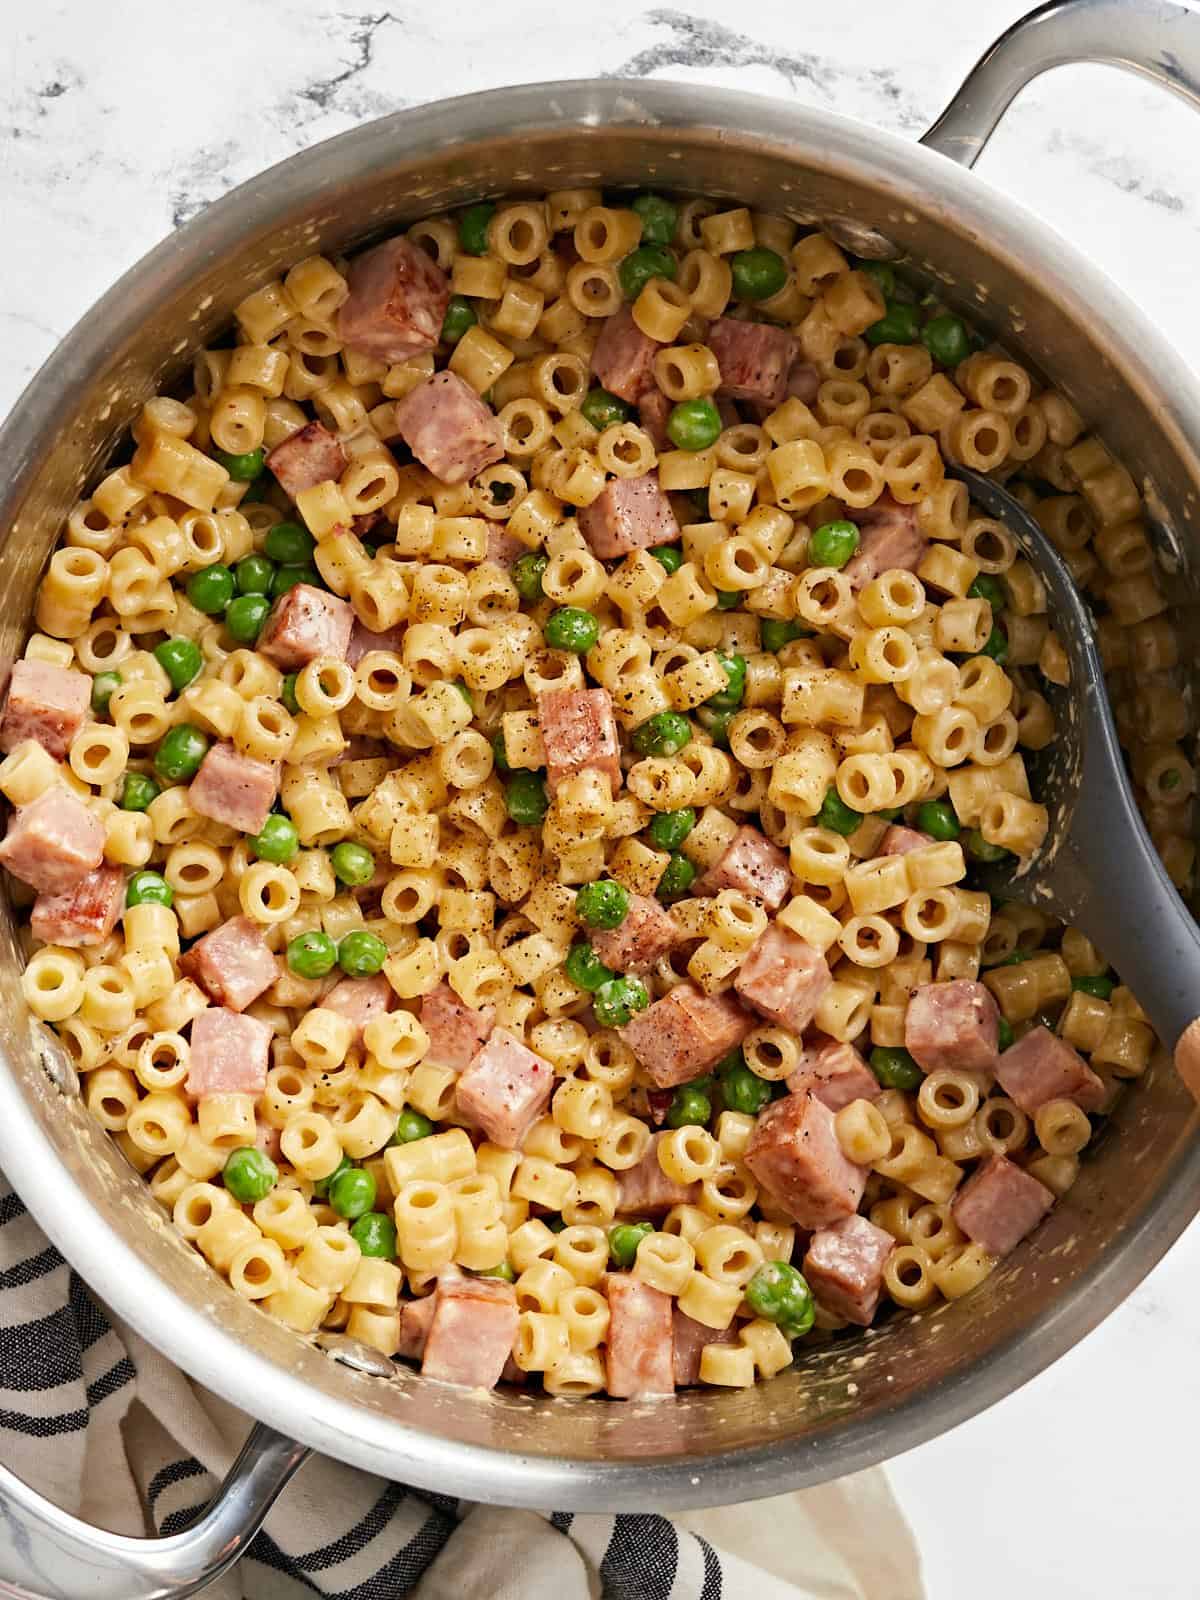 Overhead view of a pot full of pasta with peas and ham, a spoon in the side.